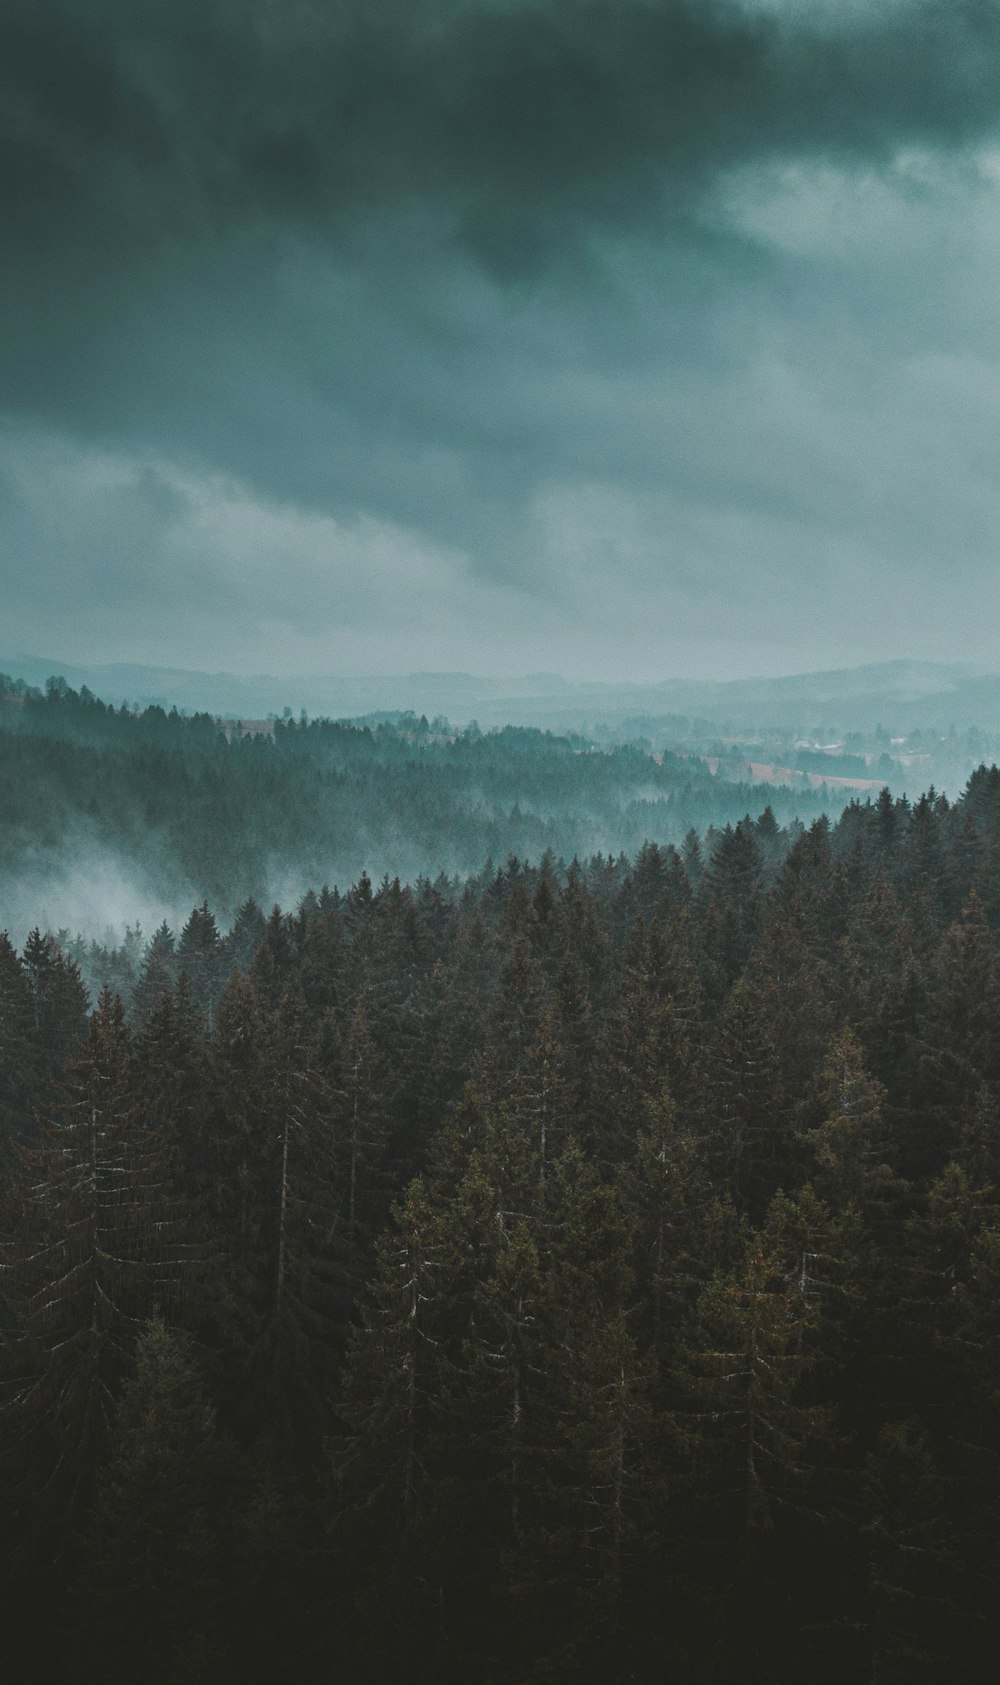 a forest filled with lots of trees under a cloudy sky